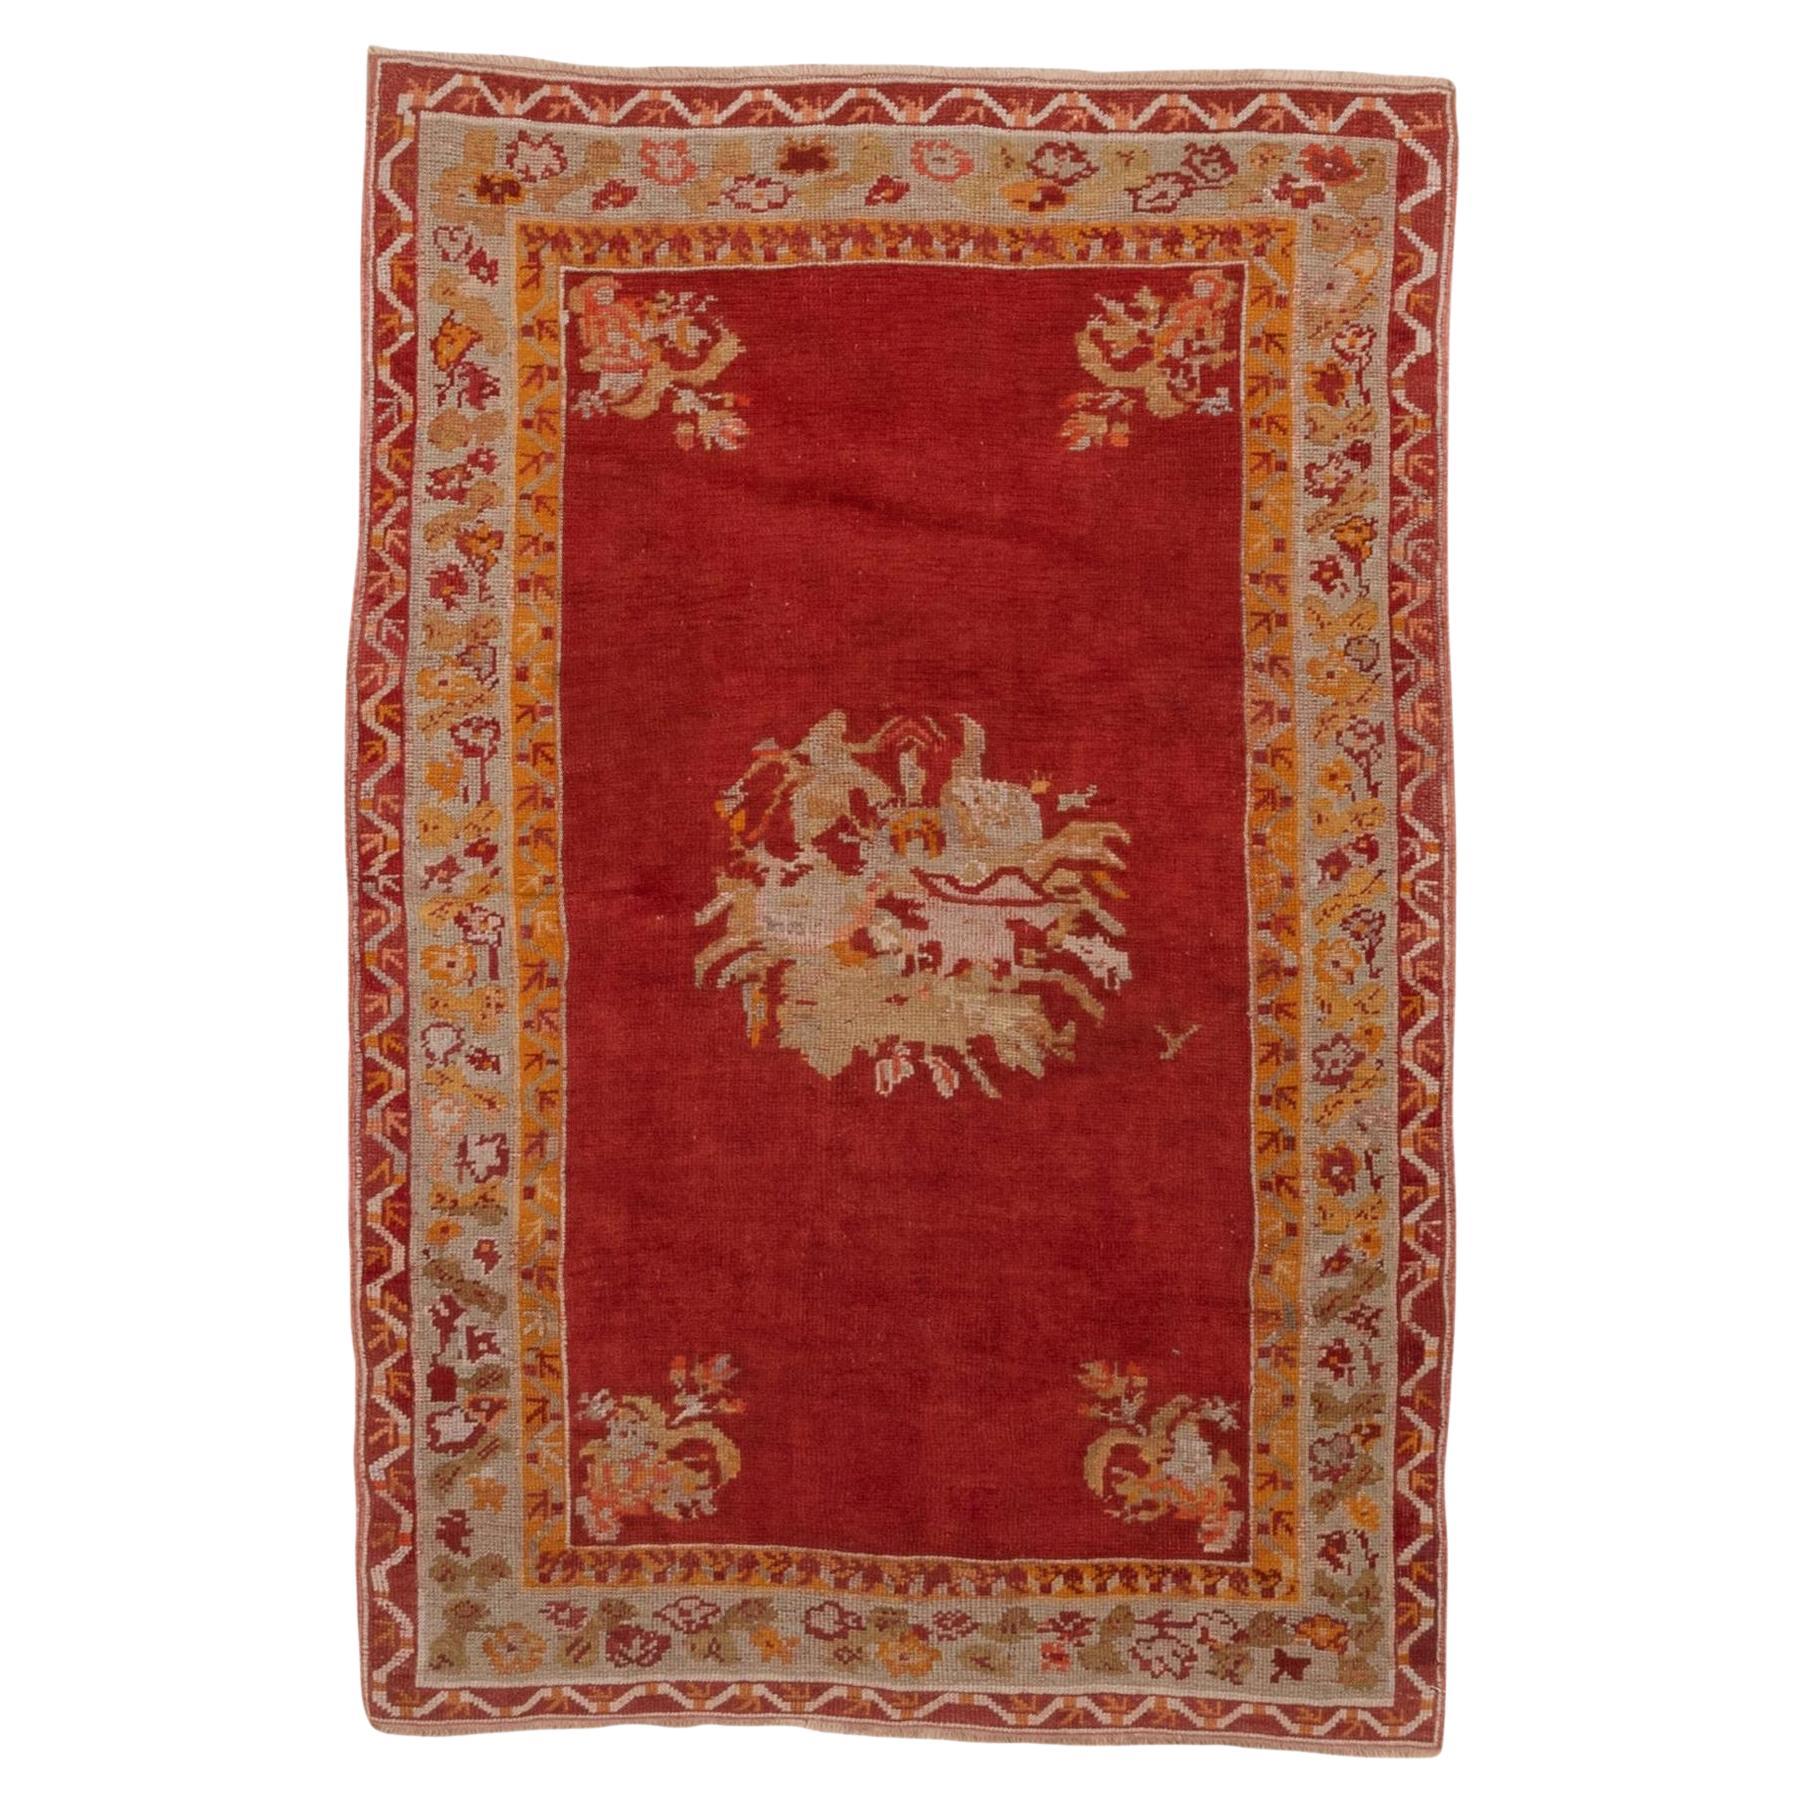 1930s Antique Turkish Oushak Rug, Red Field, Floral Multicolored Borders For Sale